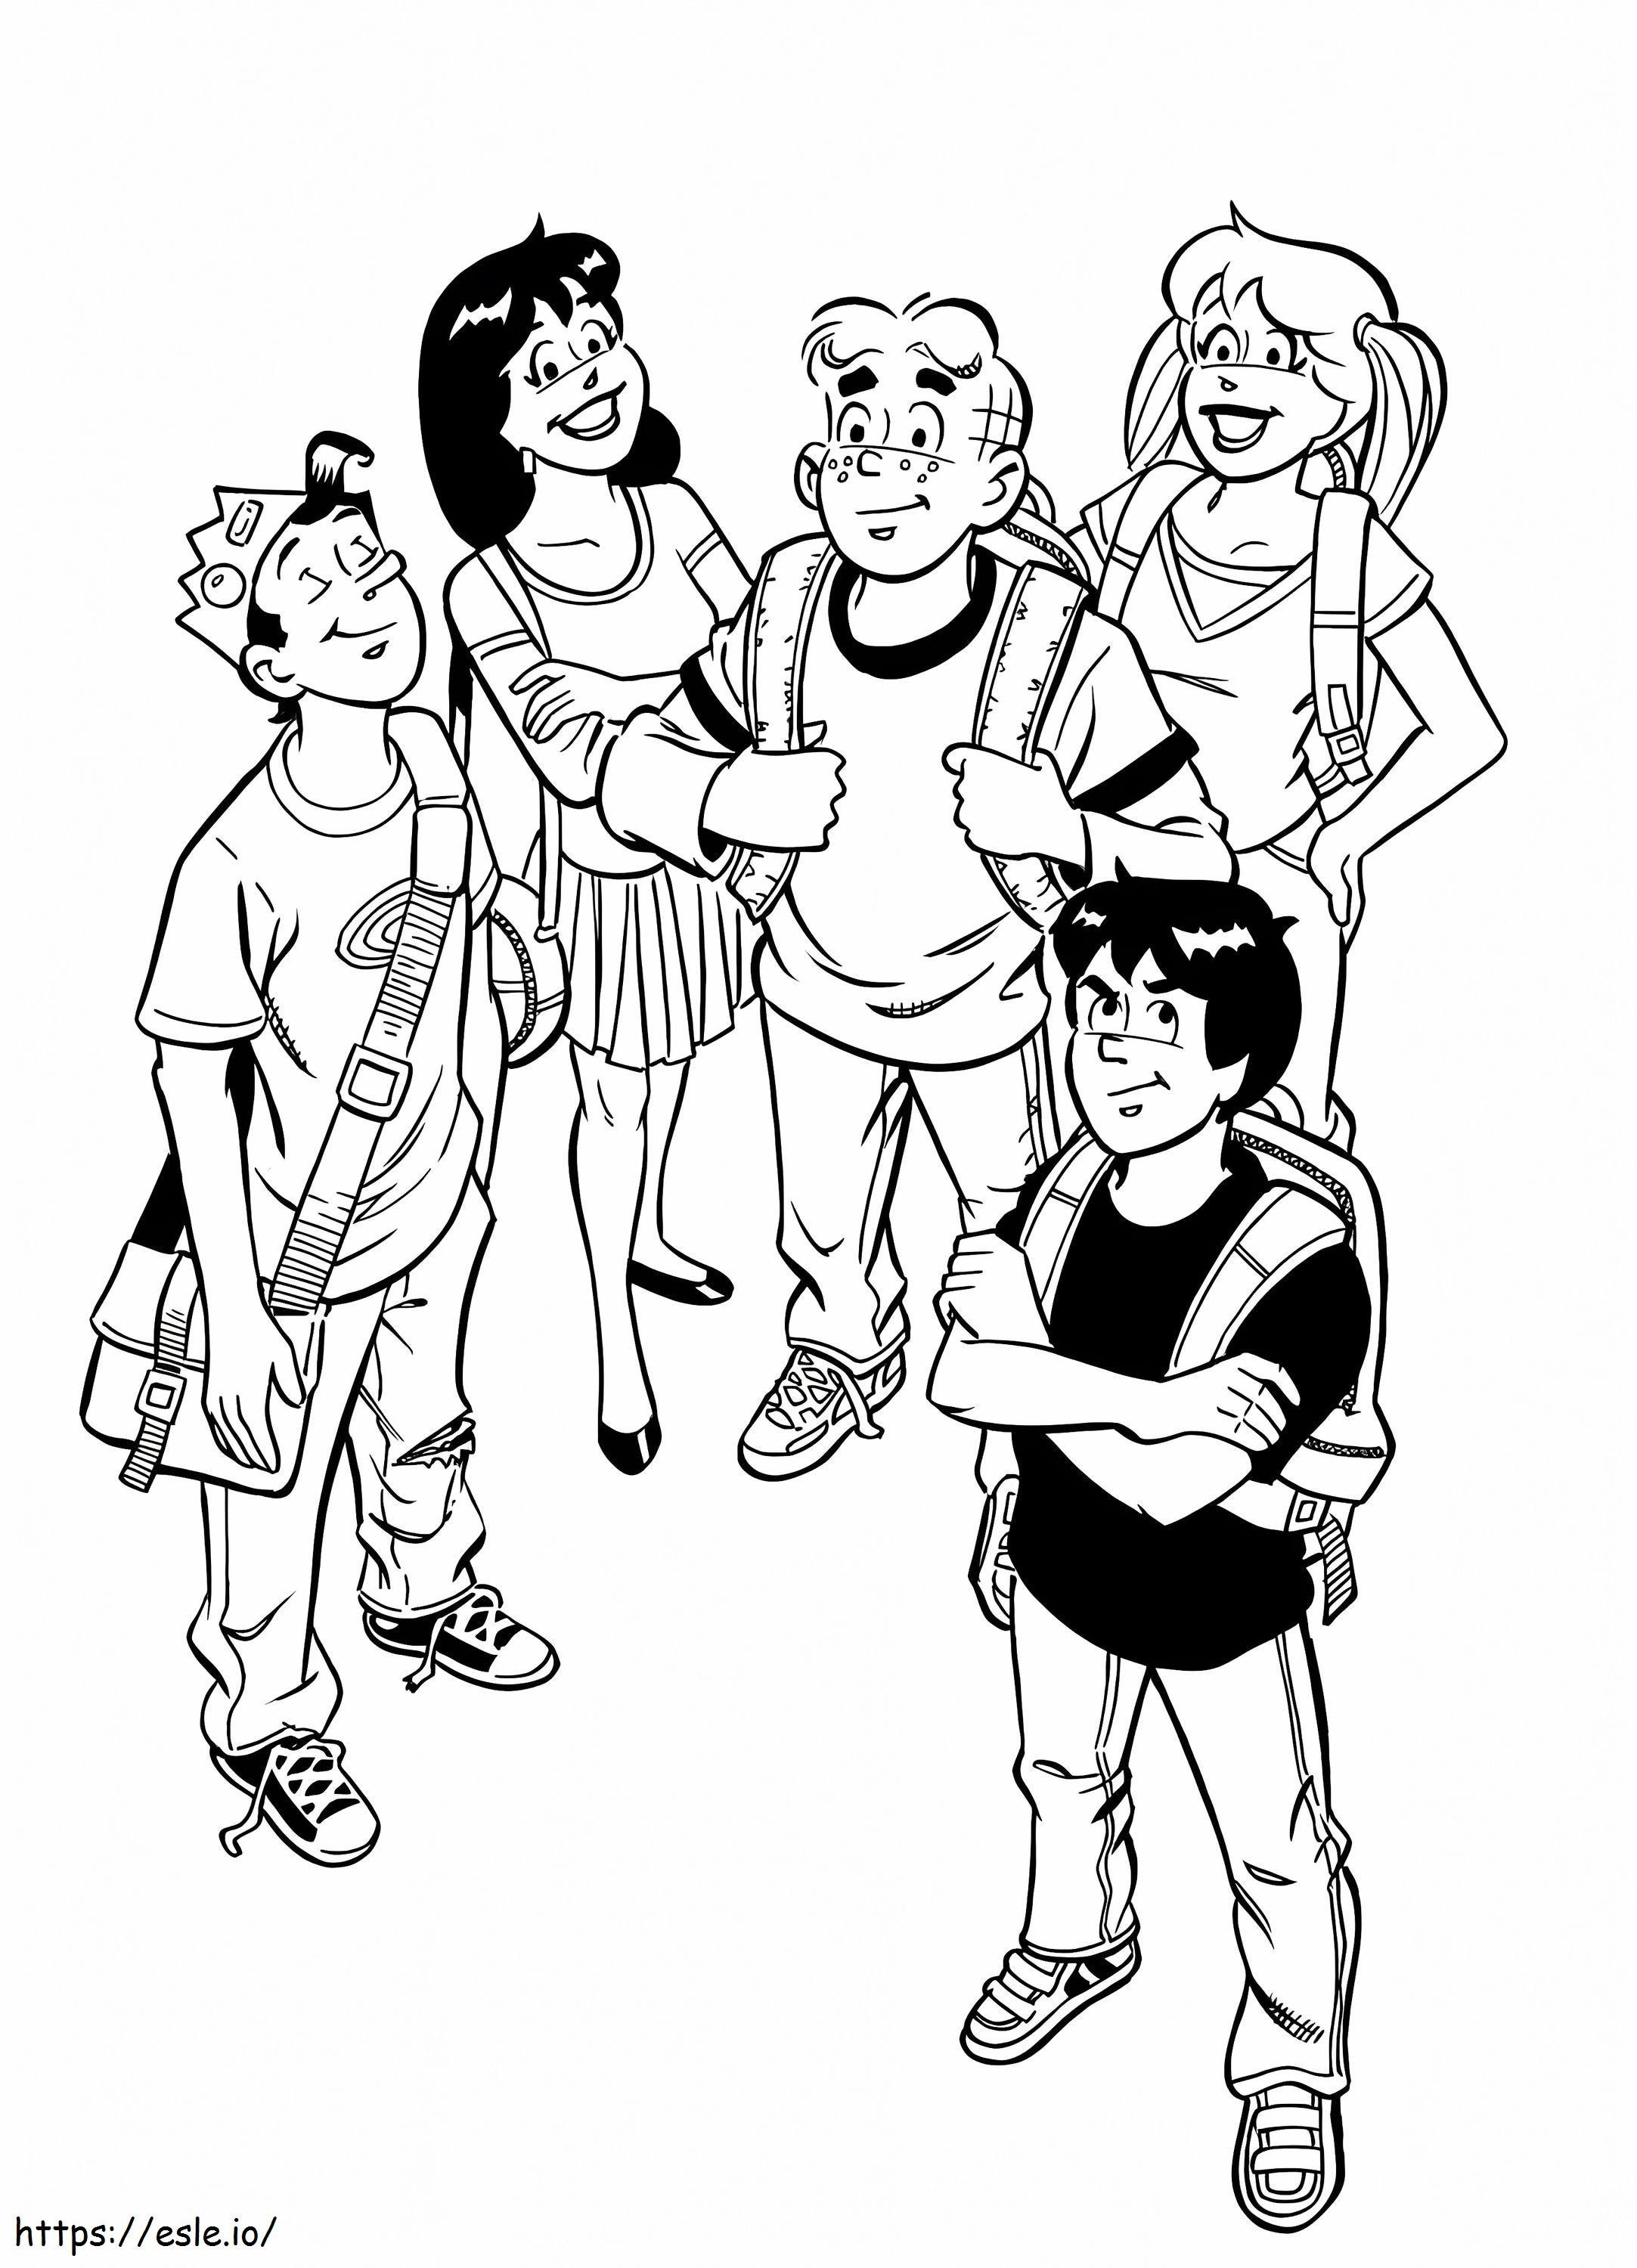 Riverdale 6 coloring page